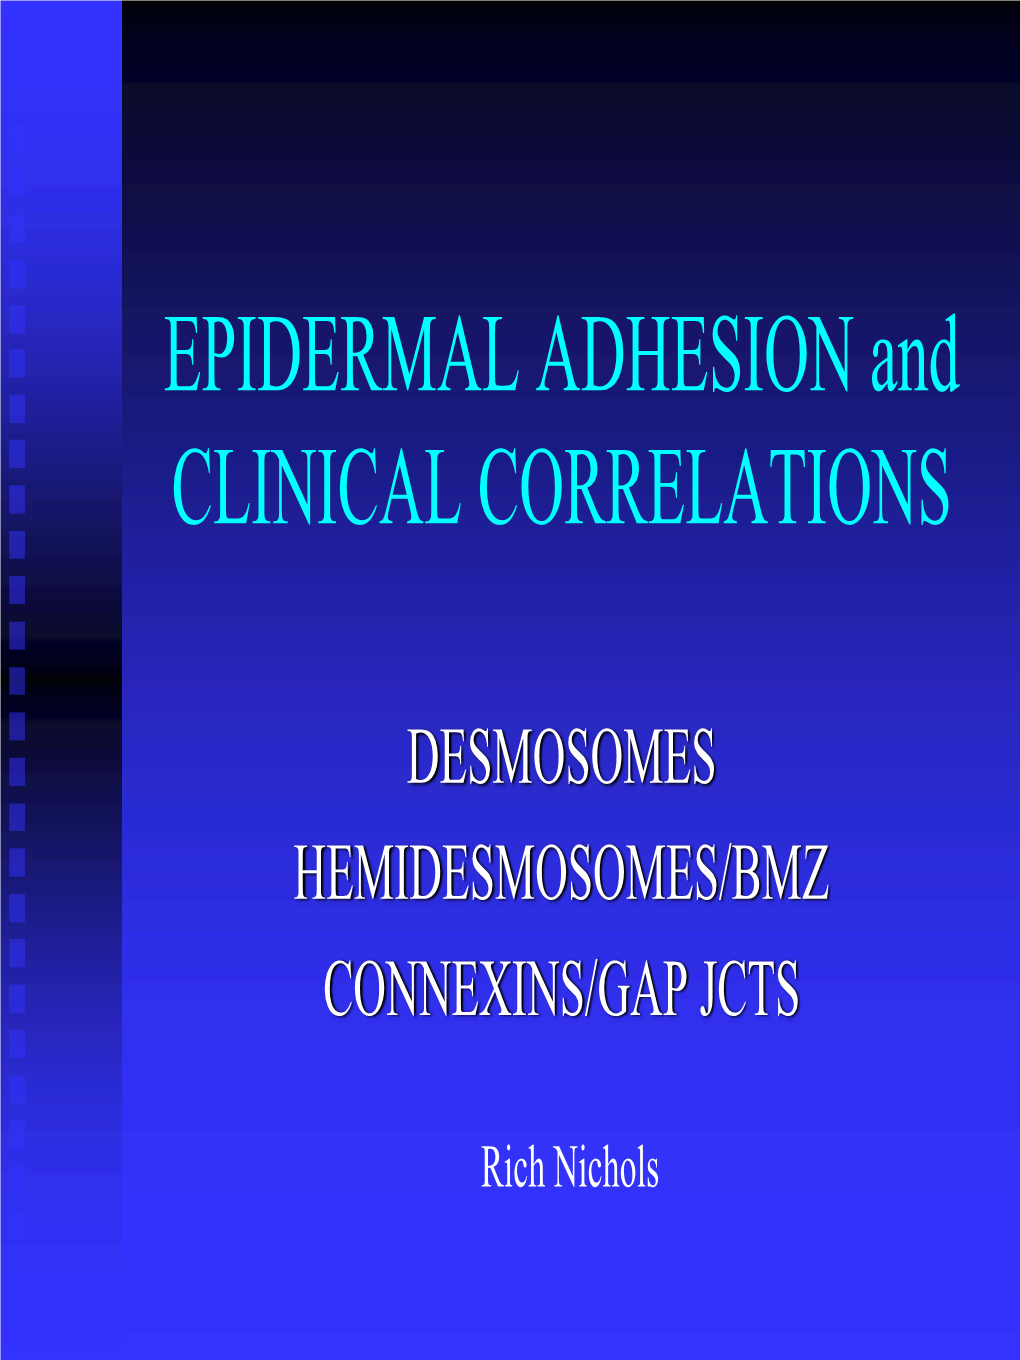 EPIDERMAL ADHESION and CLINICAL CORRELATIONS